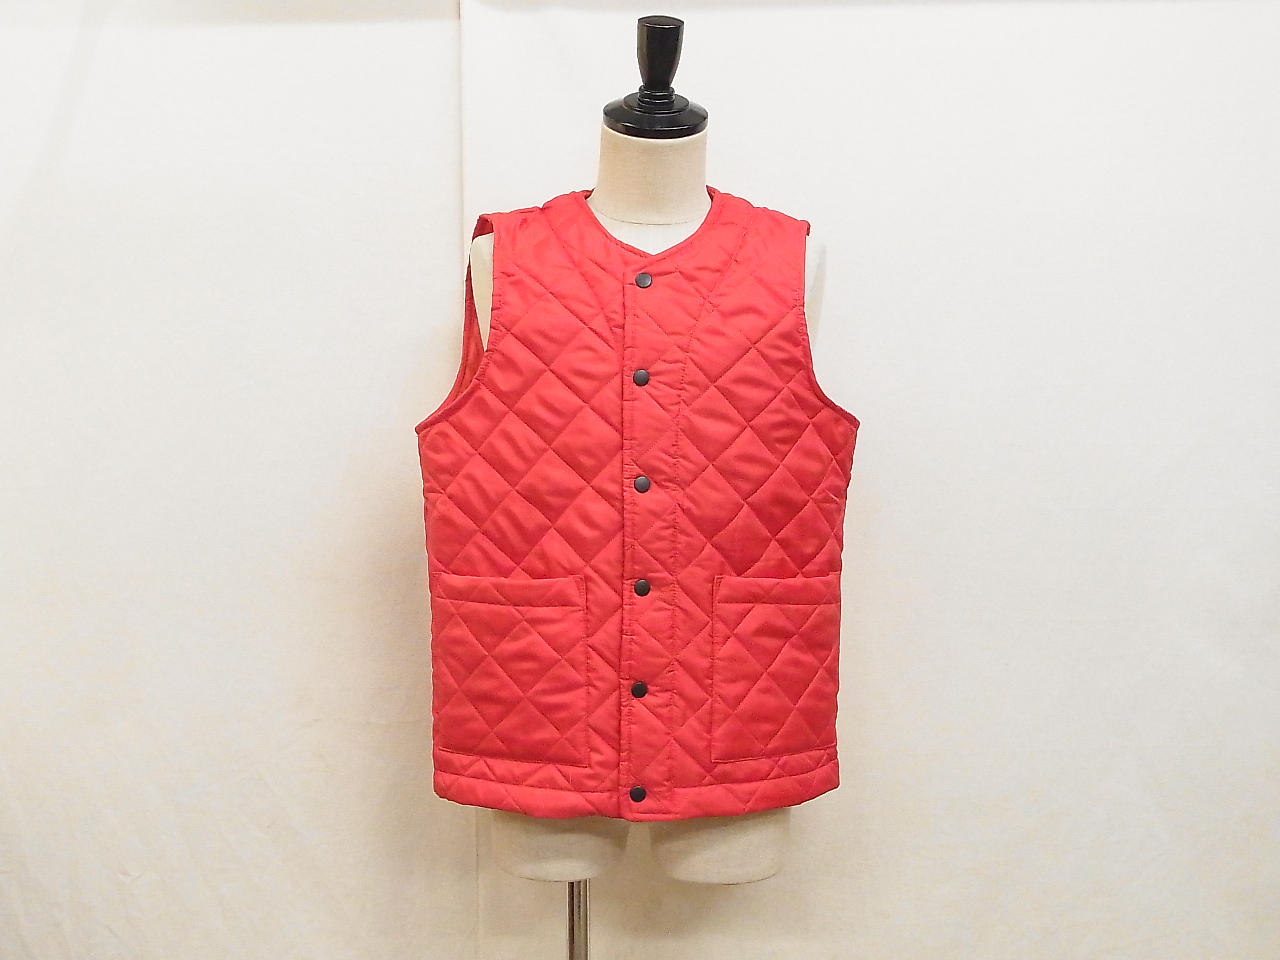 beaver-quiltedvest-red-20211029-4